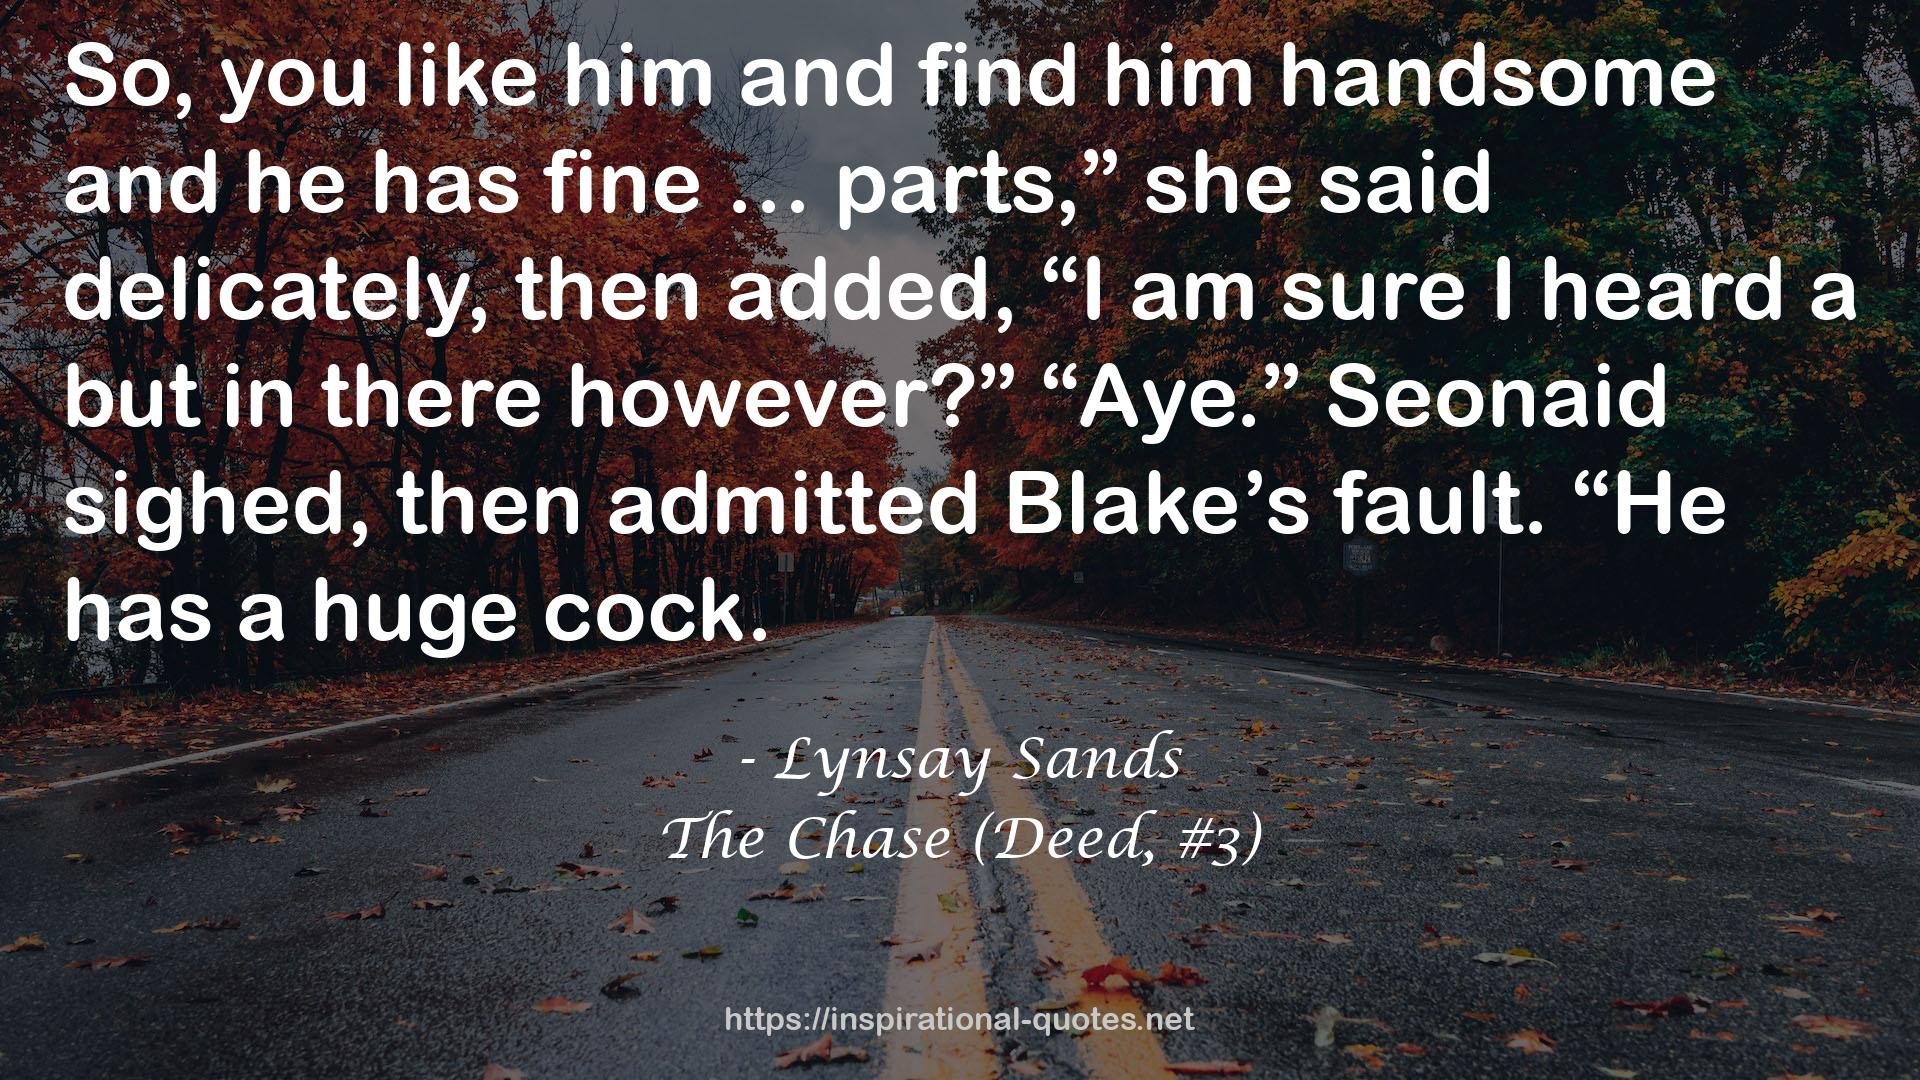 The Chase (Deed, #3) QUOTES